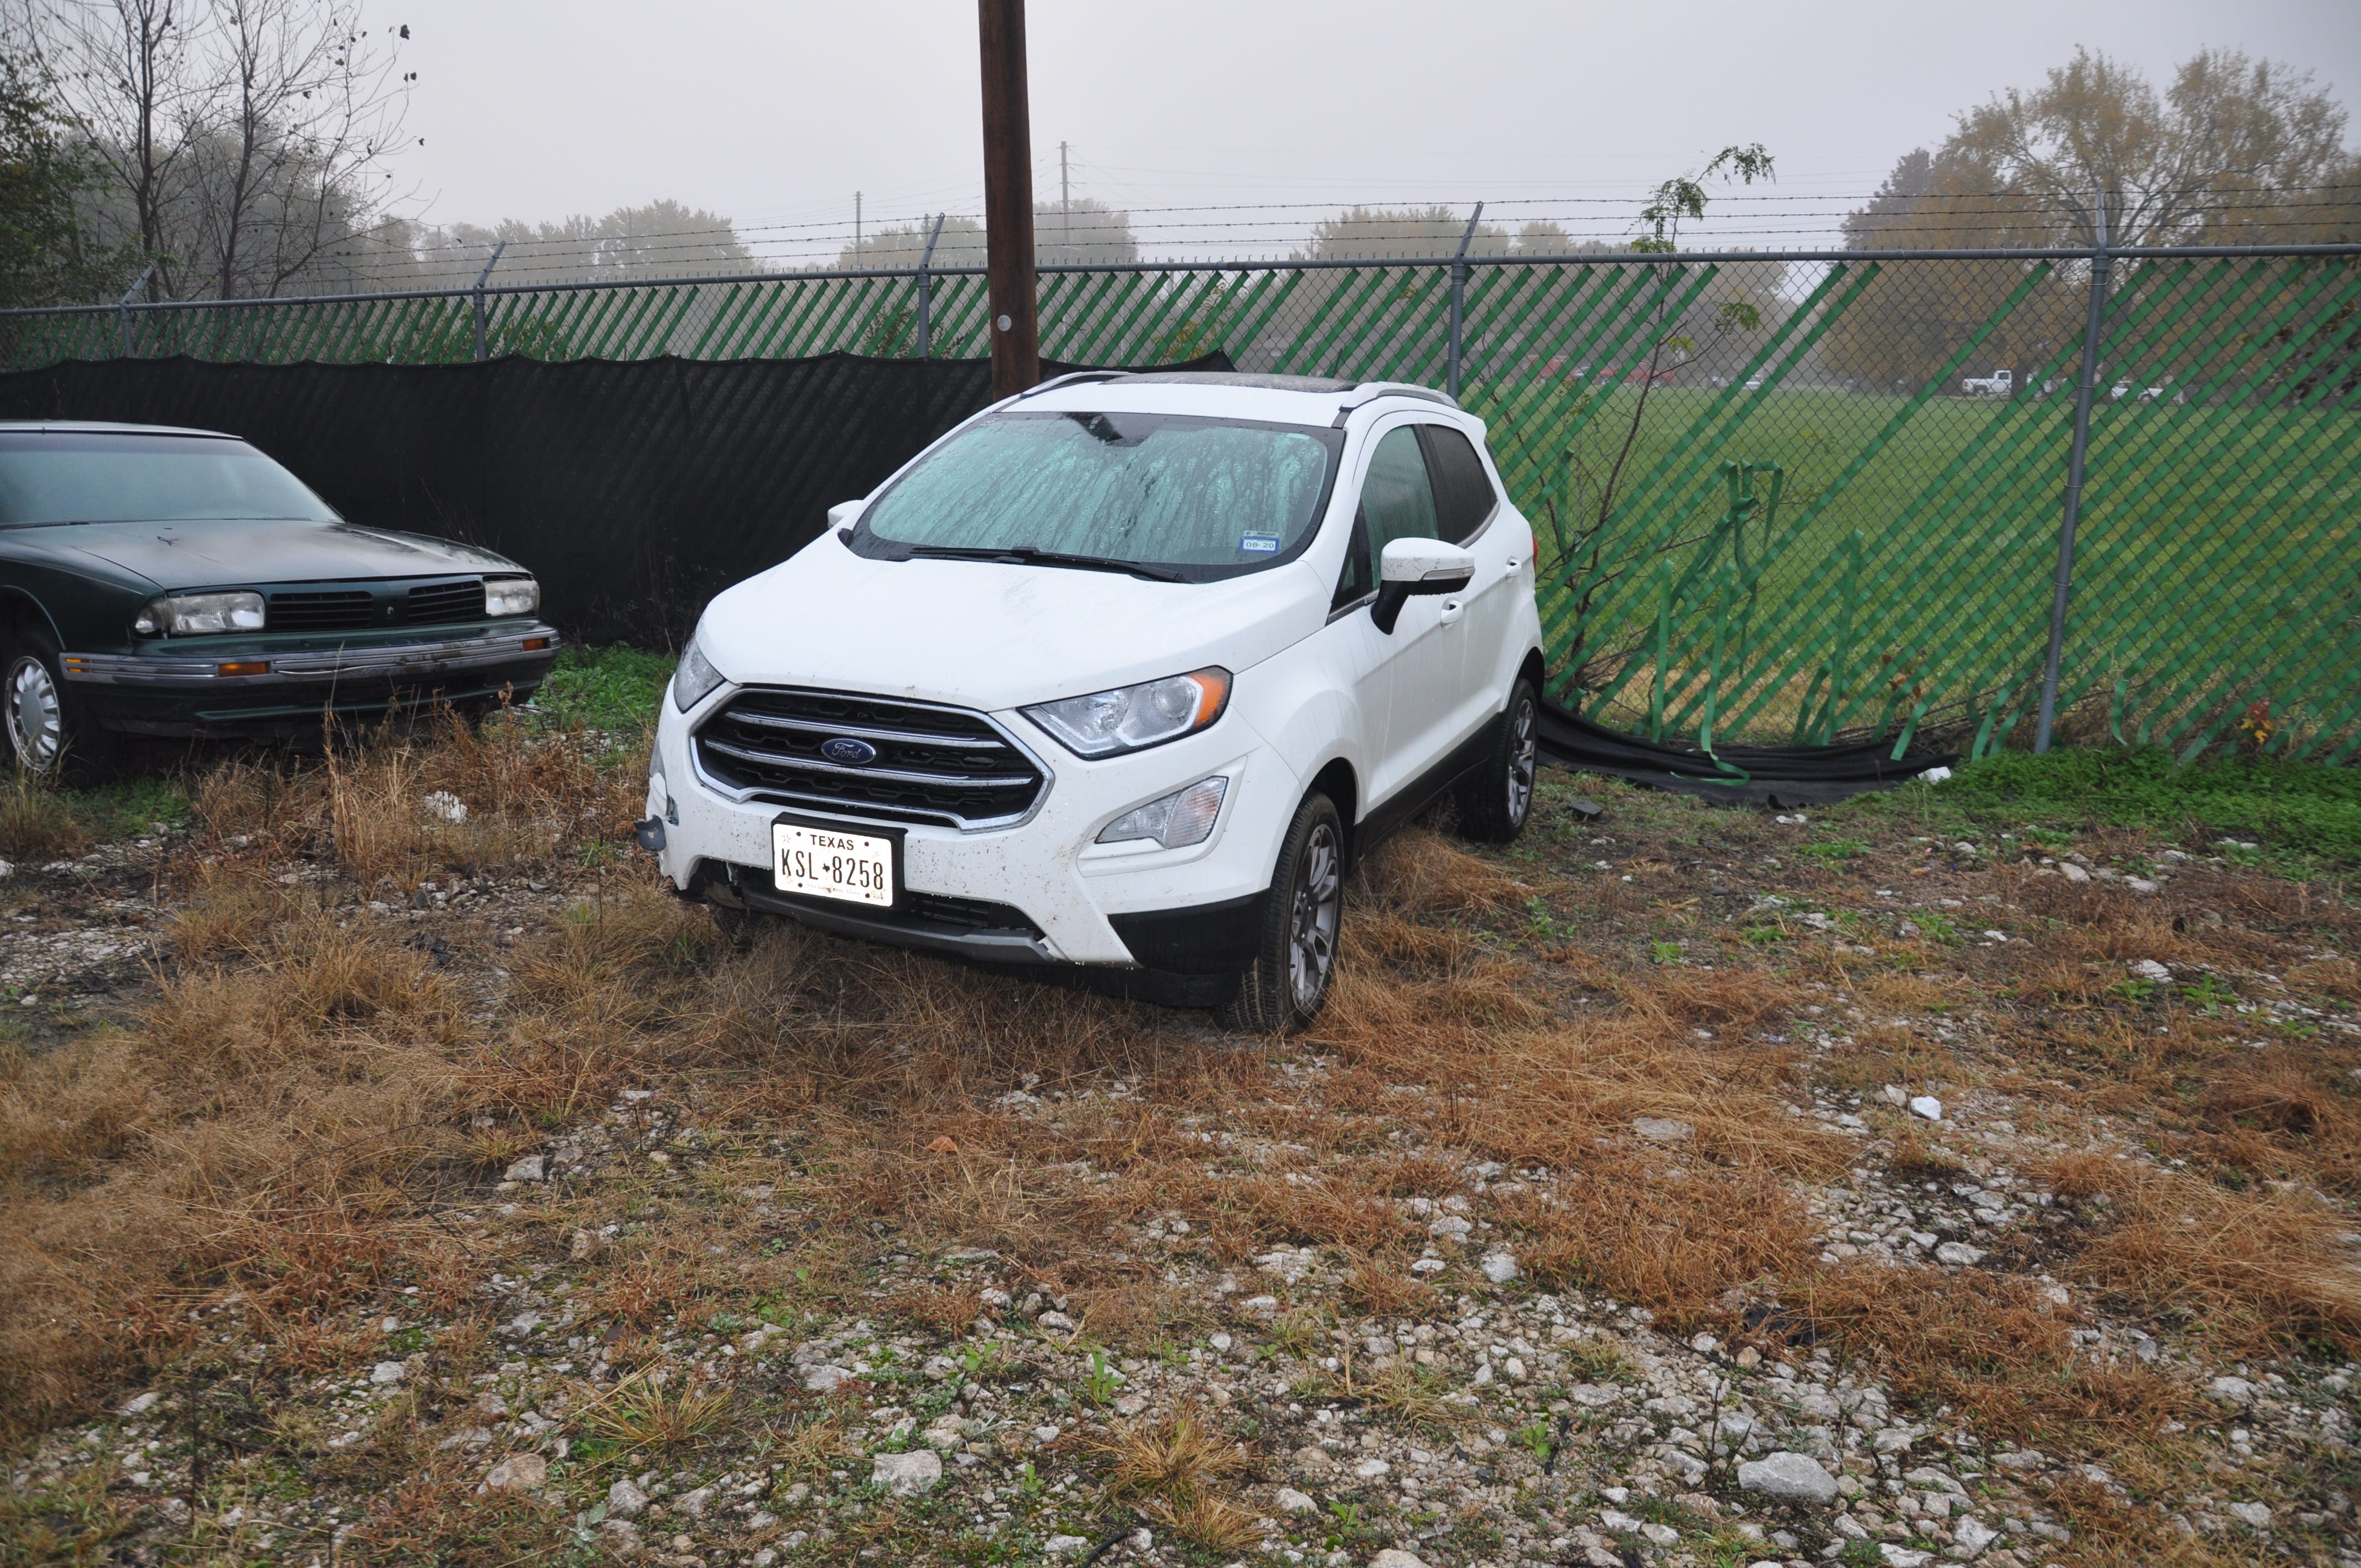 Tim Dean crashed the first of two rental cars he used to drive to New York while he was driving through Emporia, Kansas on Oct. 20, 2019.